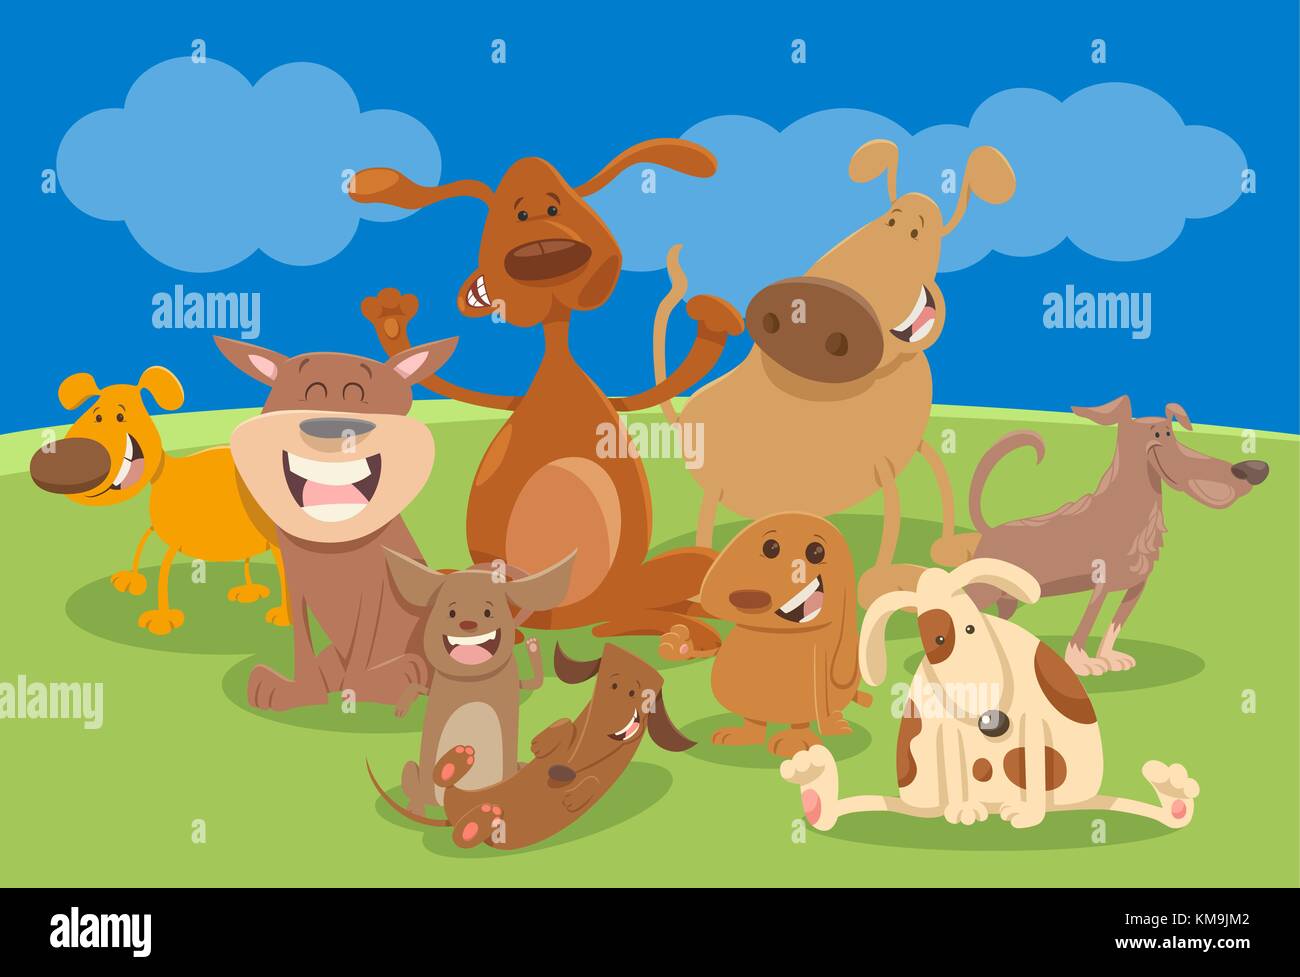 Cartoon Illustration of Funny Dogs or Puppies Animal Characters Group Stock Vector